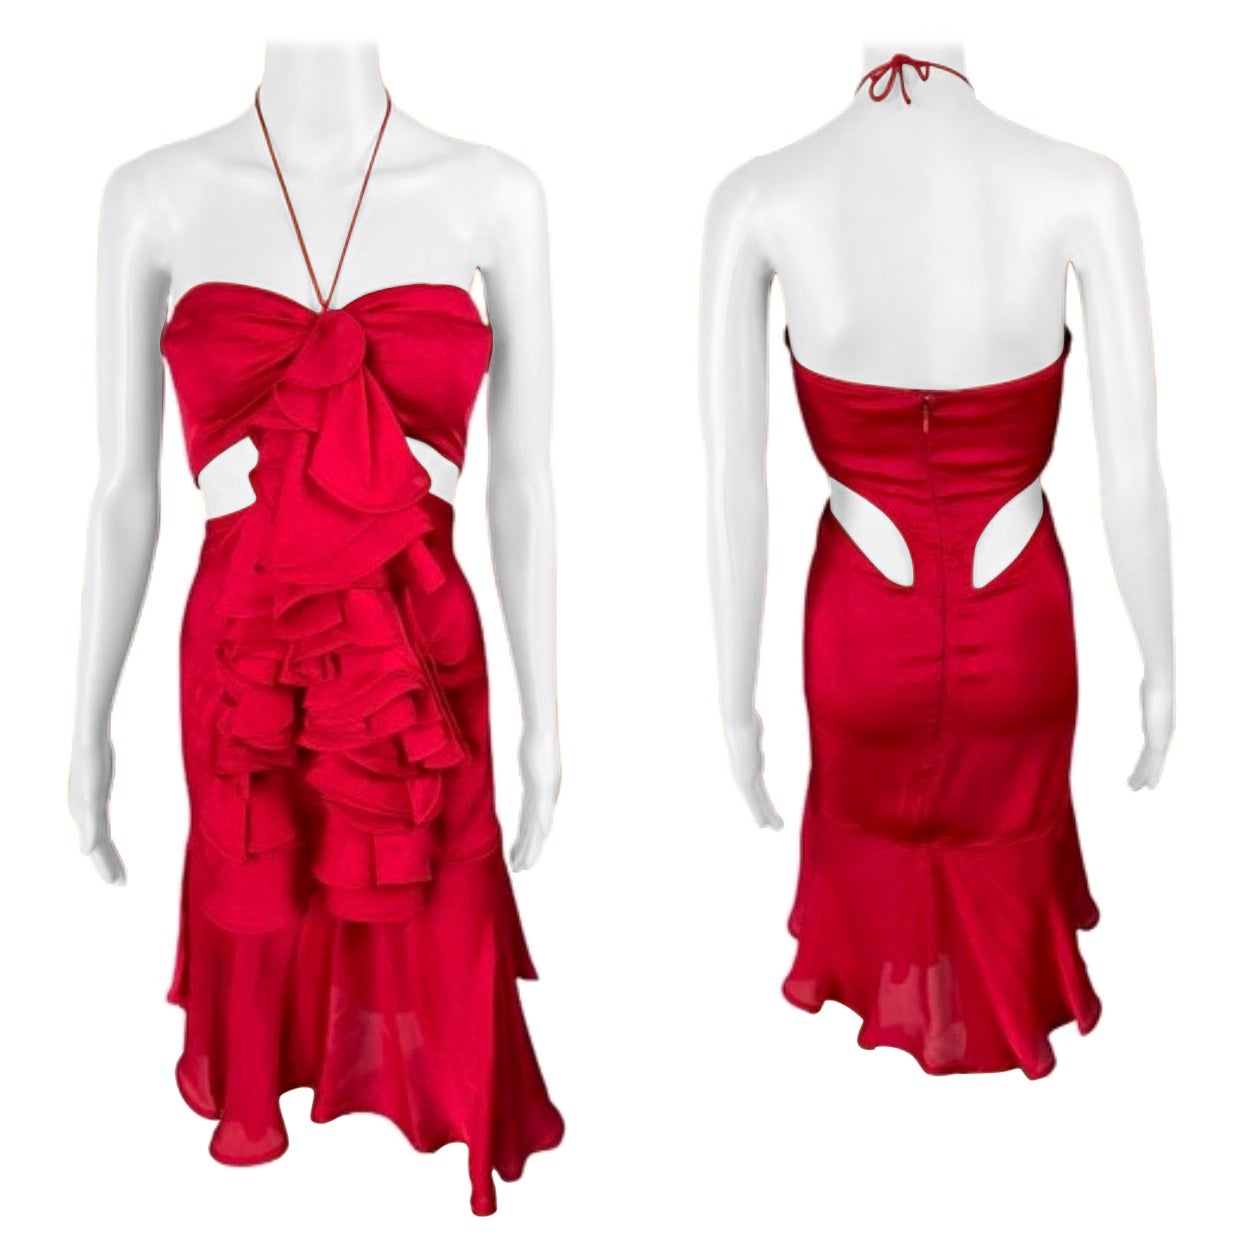 Tom Ford for Yves Saint Laurent  F/W 2003 Runway Ruffled Cutout Bra Red Dress  For Sale